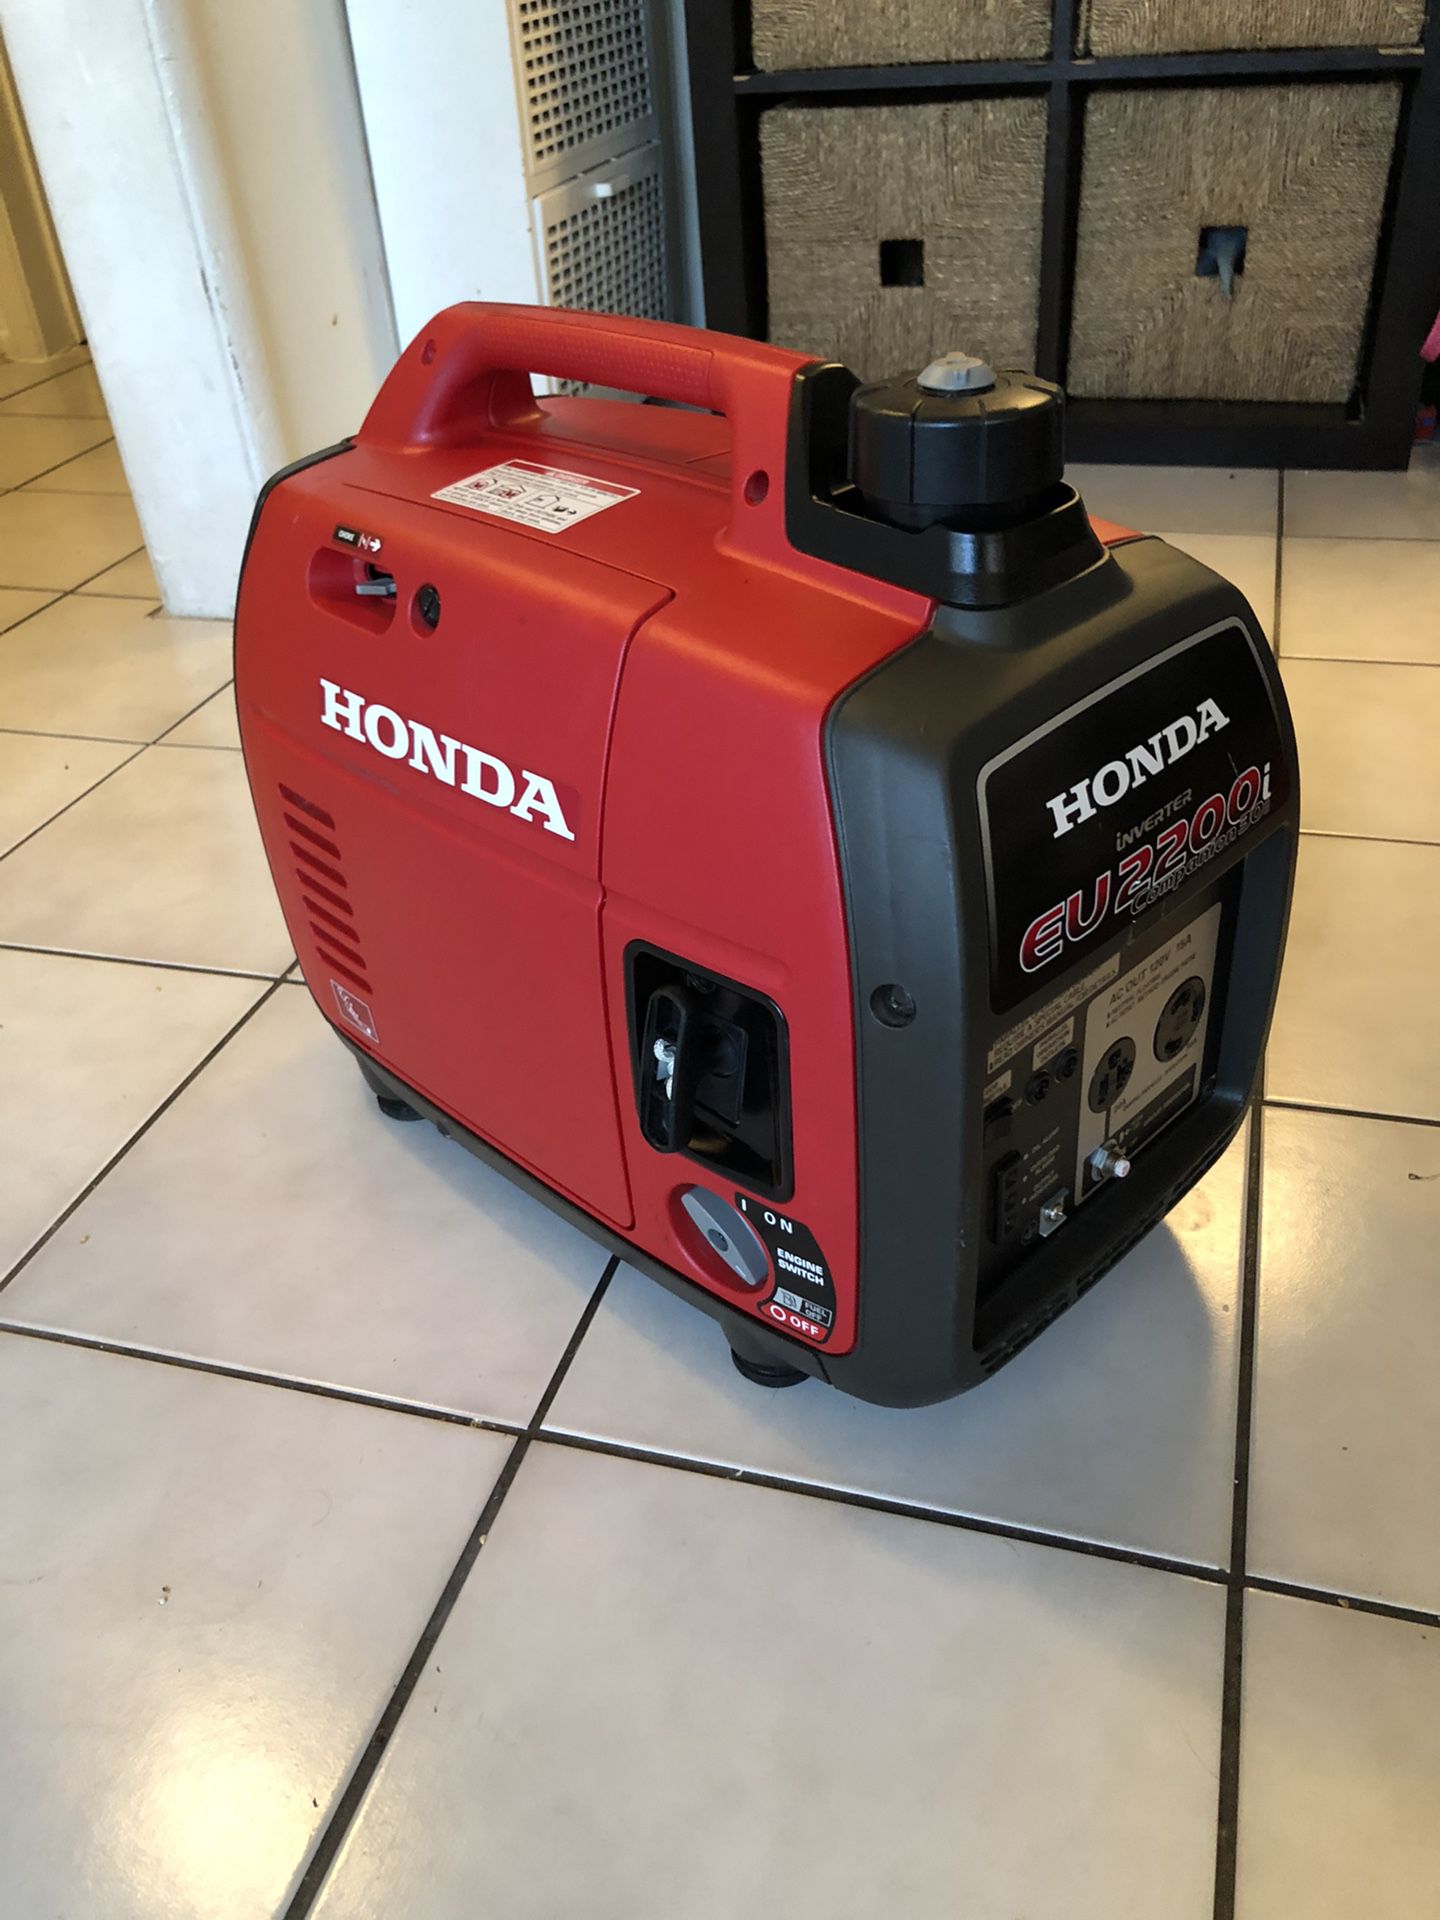 Honda eu2200i companion 30a generator in excellent condition low hours